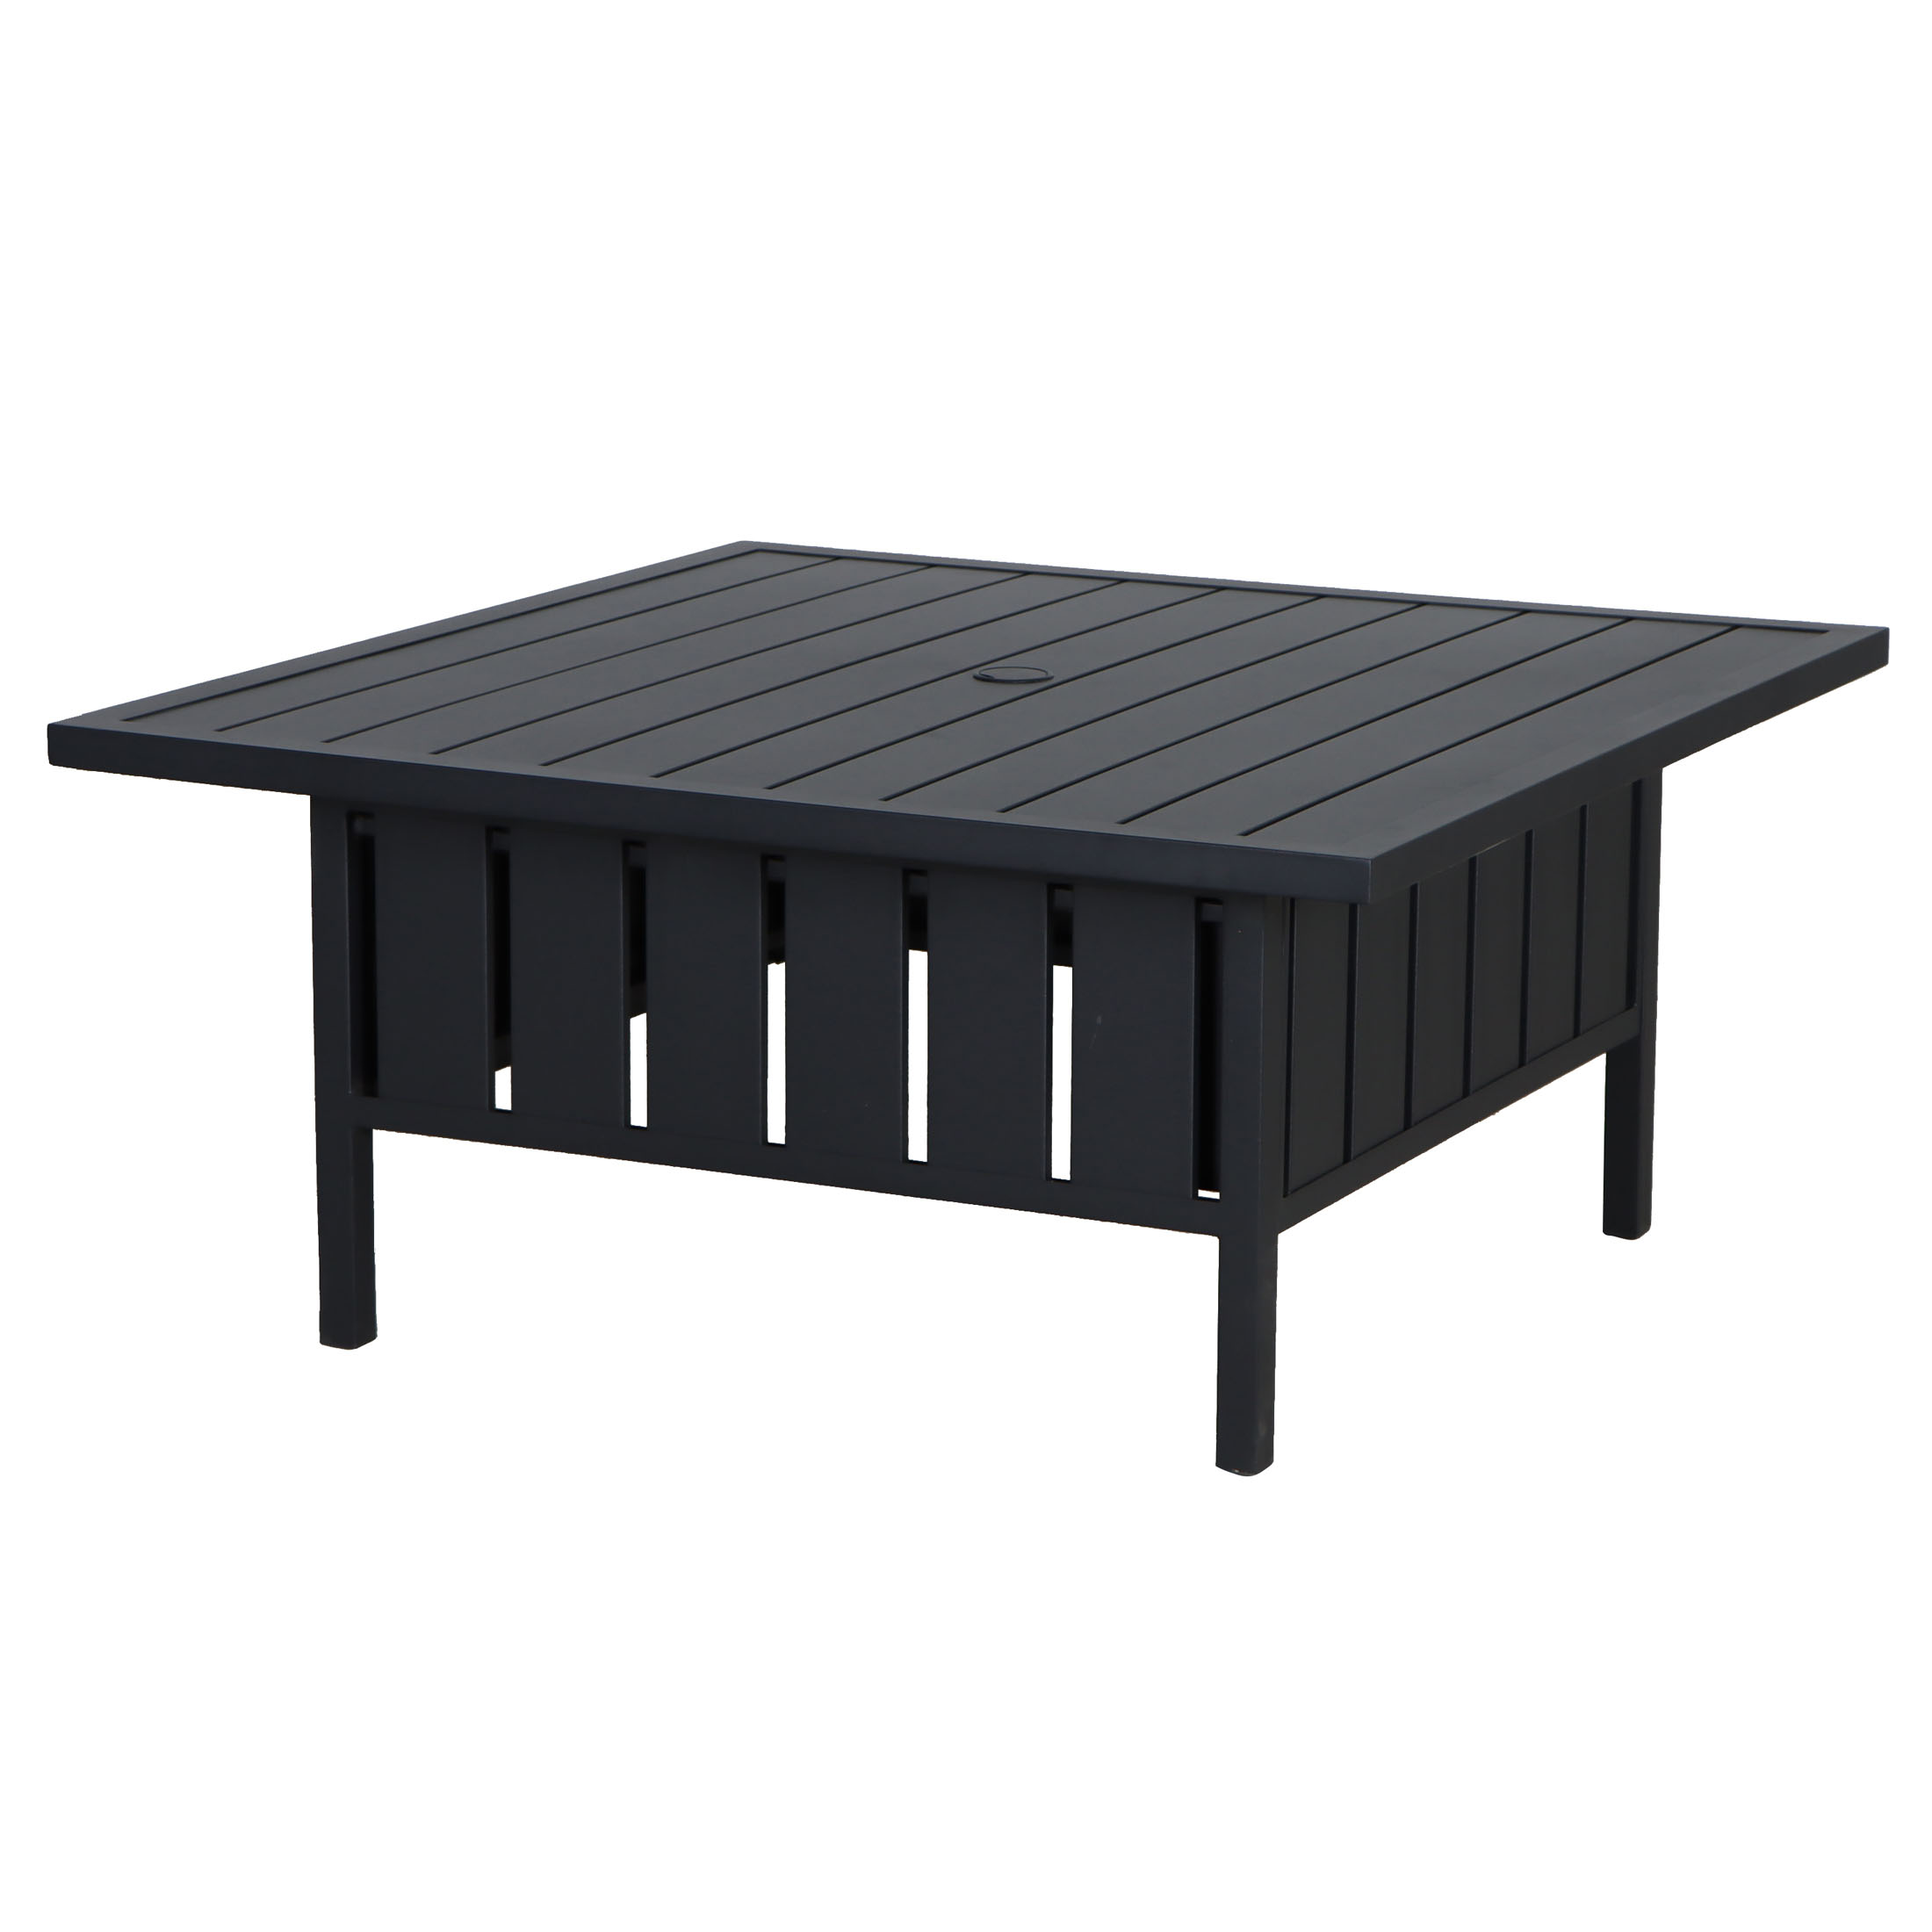 Mainstays Asher Springs Adjustable Rectangular Steel Outdoor Table - image 4 of 9